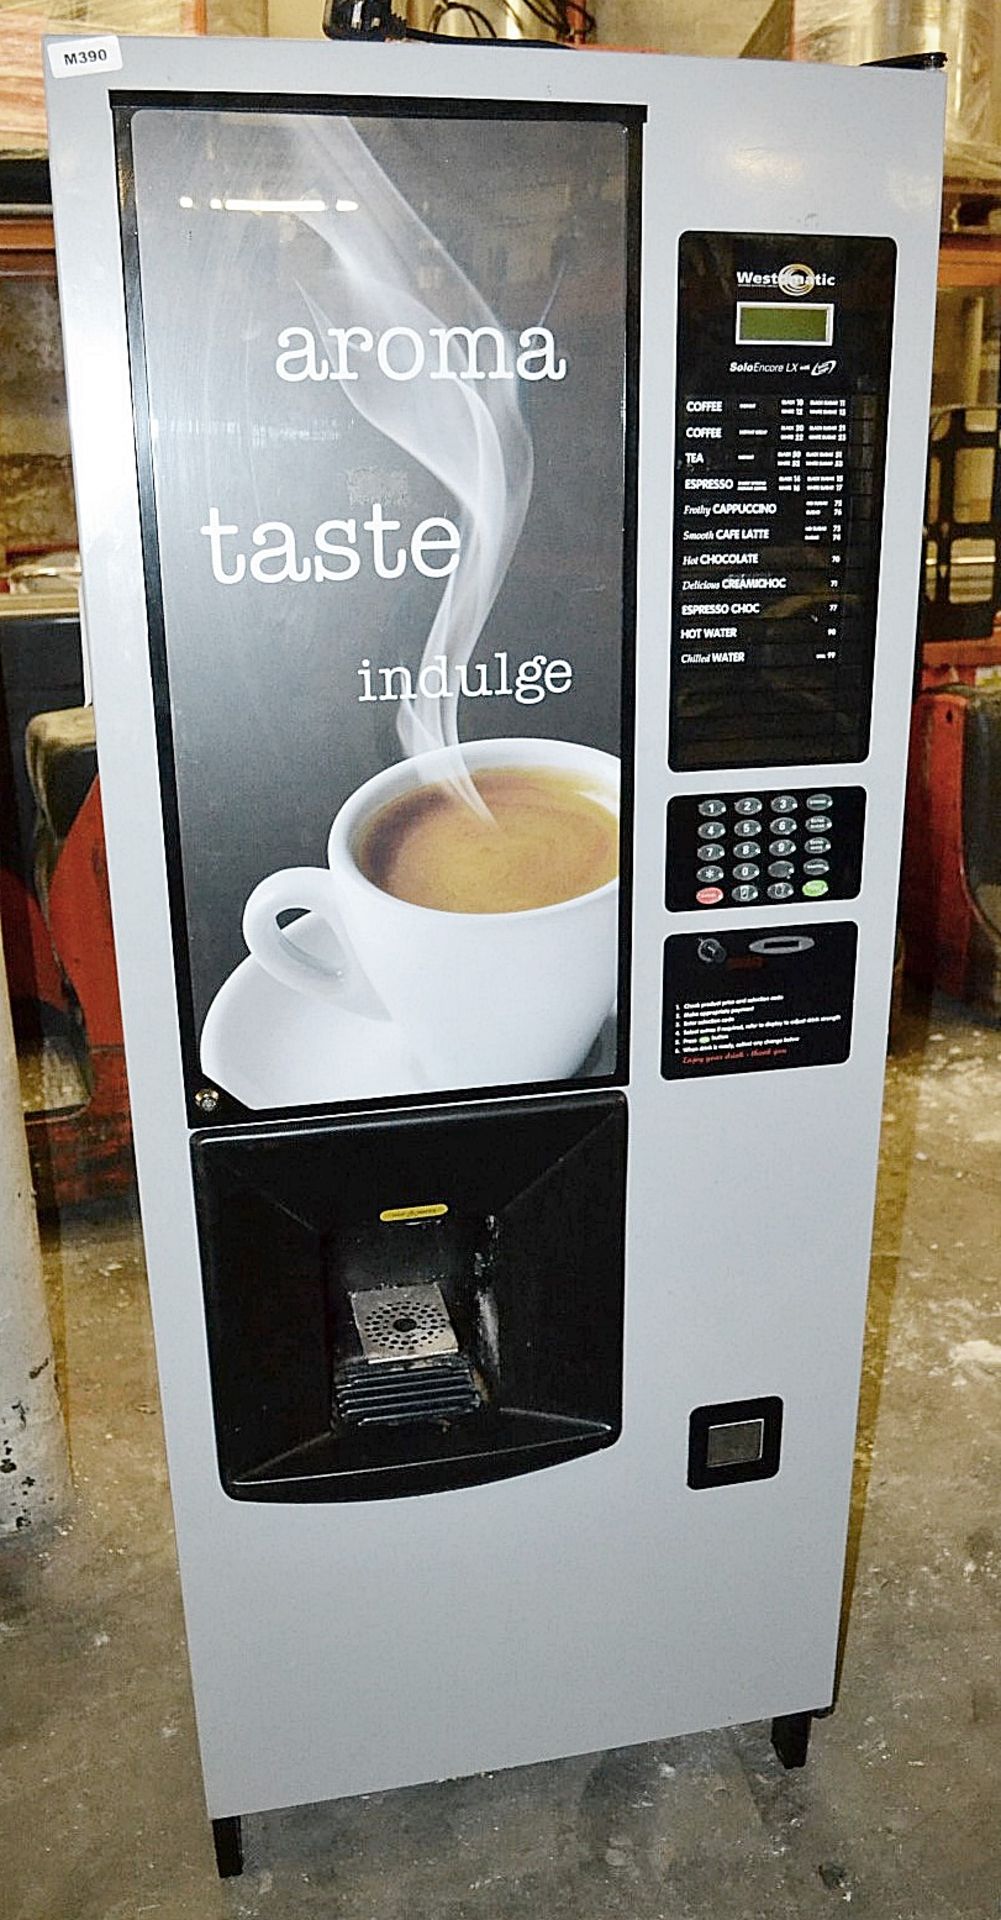 1 x Westomatic Solo Encore LX Hot Drink Vending Machine With Sim Logic - Ref: M390 - Image 2 of 6